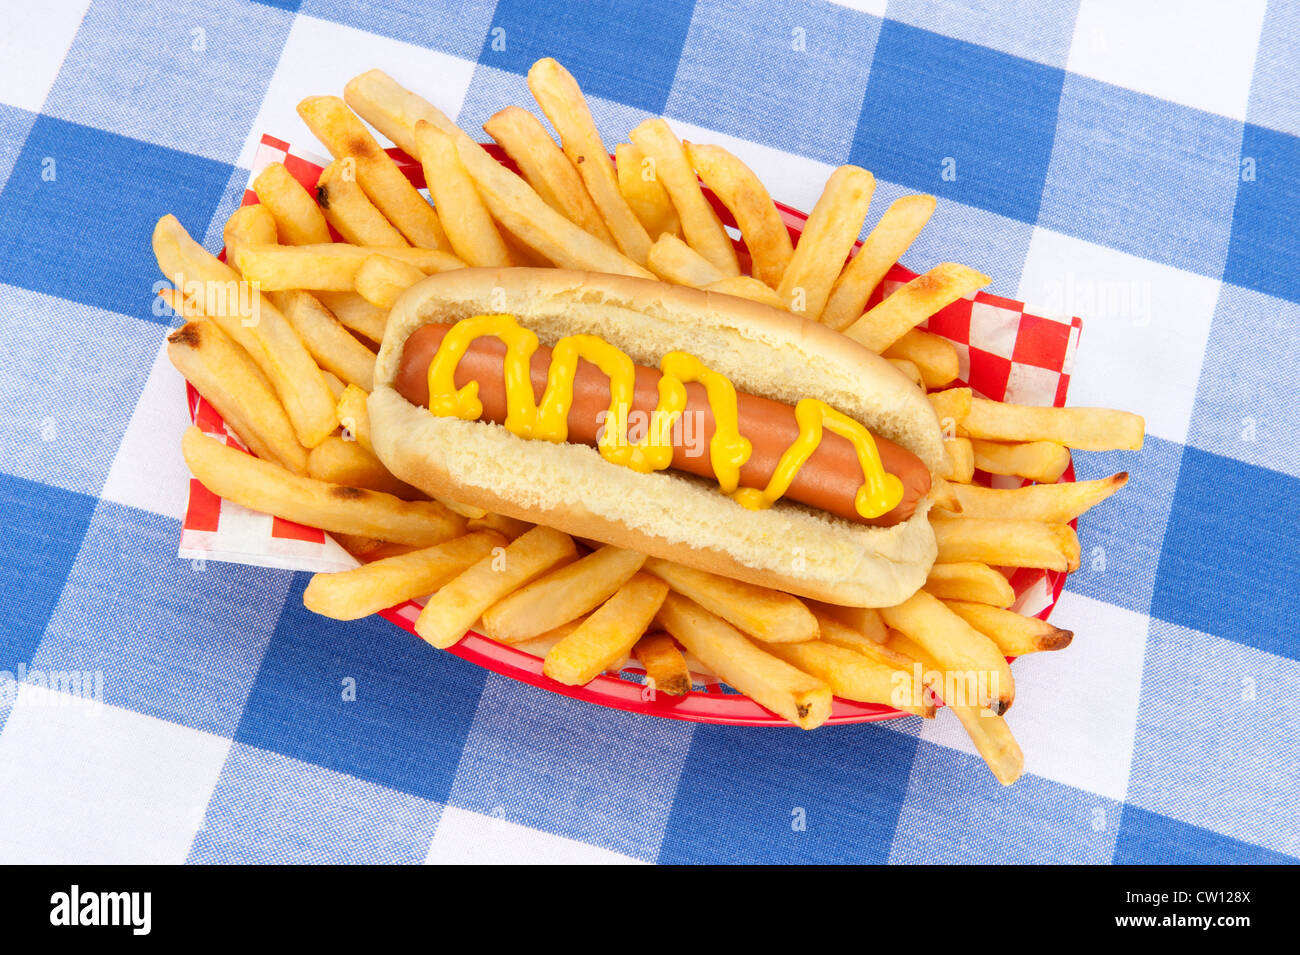 A basket of french fries and a hotdog with mustard on a tabletop covered with a checkered tablecloth. Stock Photo